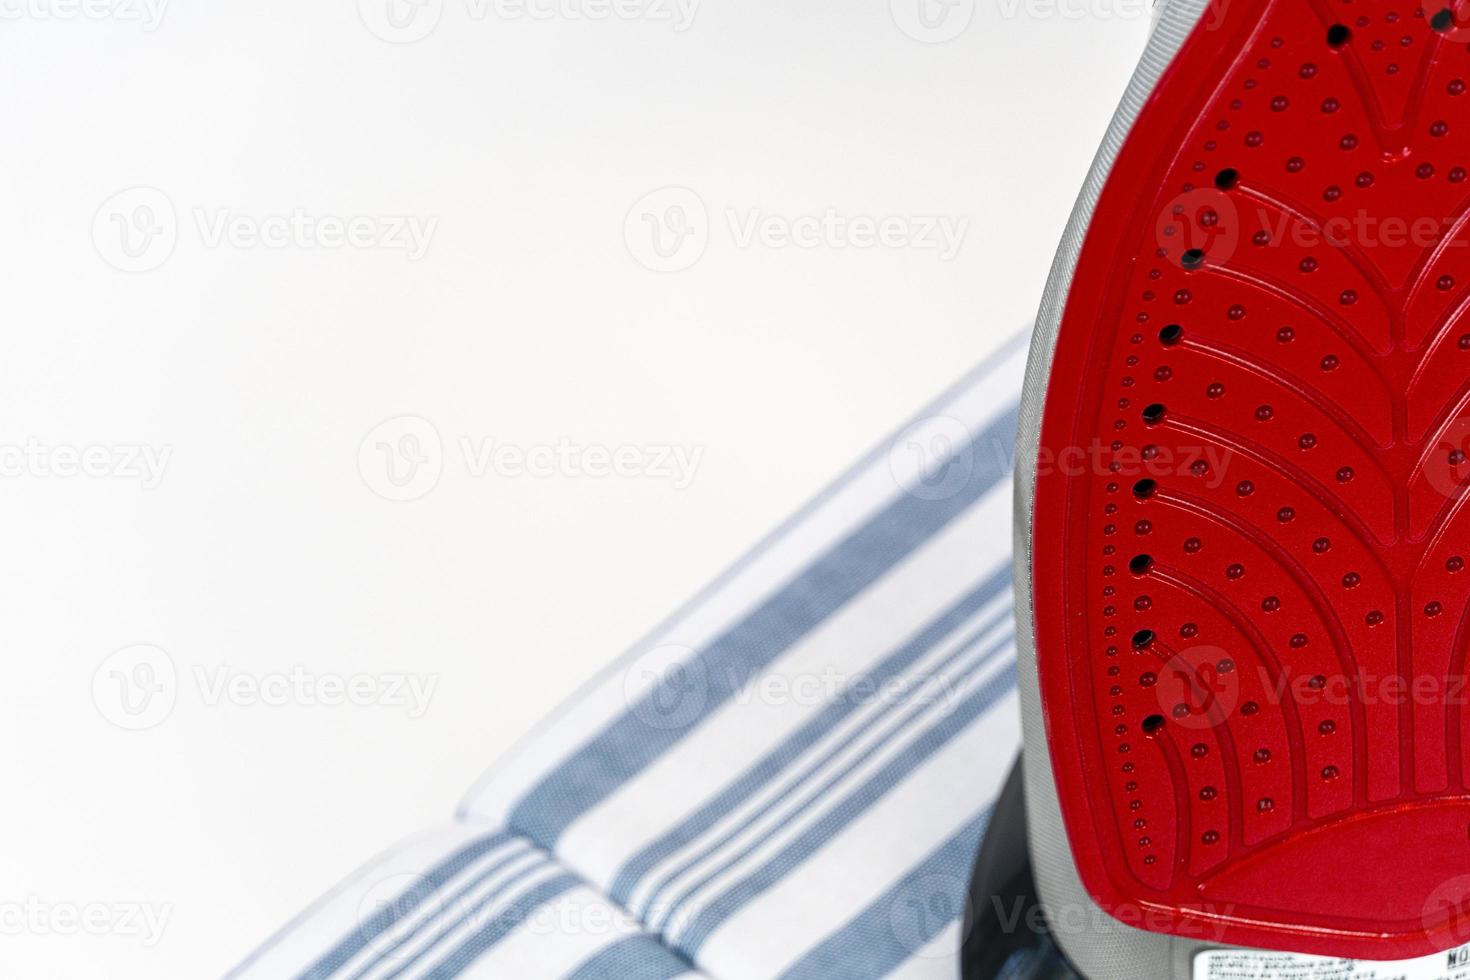 new clothes iron on white background, red ceramic iron, and blue fabric ironing board base photo